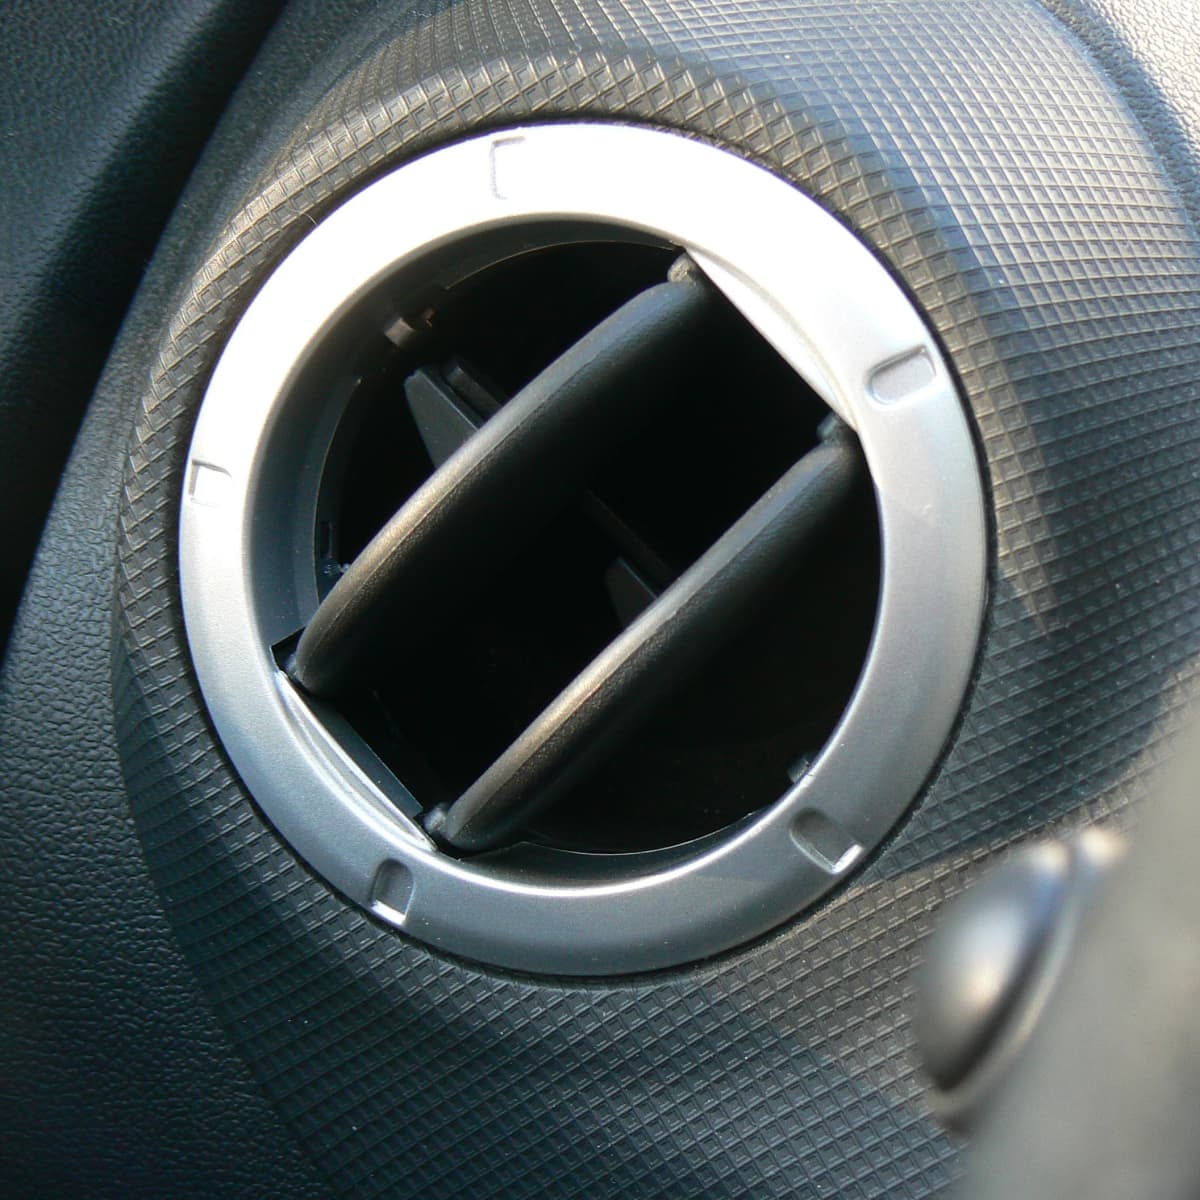 Help! My Car Heater Blows Cold Air—What Should I Do? - AxleAddict